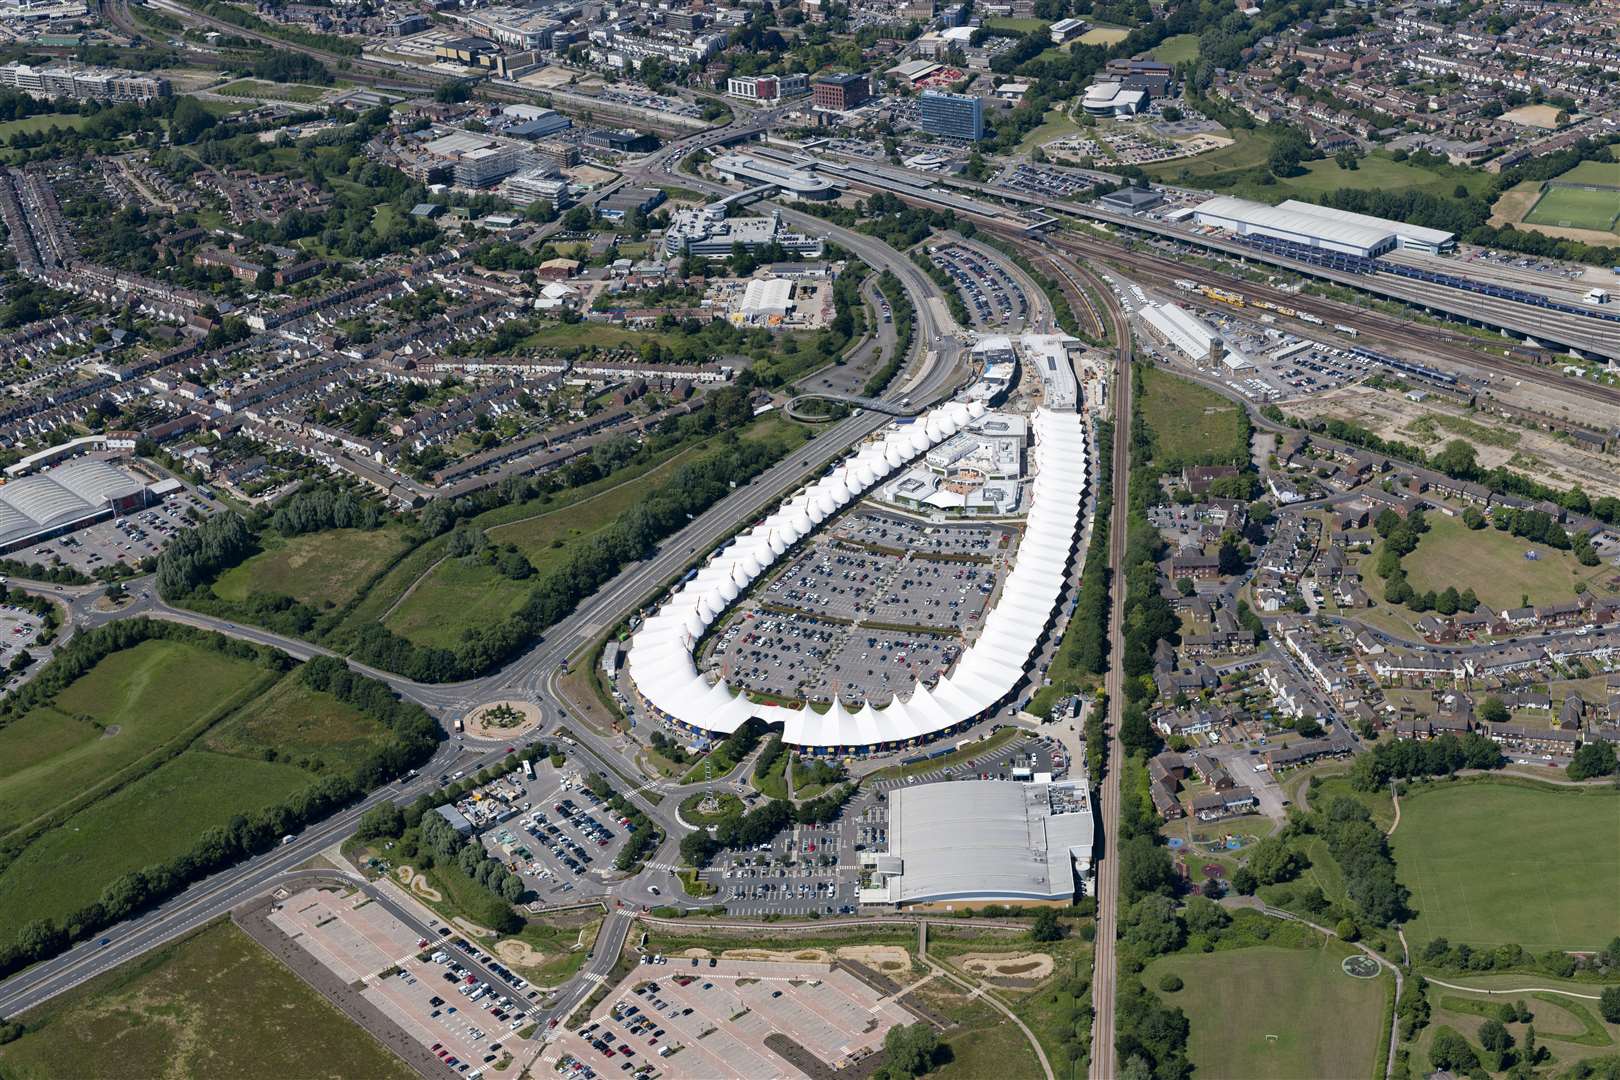 A shot of the Designer Outlet looking towards the town, with the new Outlet car park next to Asda in the foreground. Picture: Ady Kerry/Ashford Borough Council